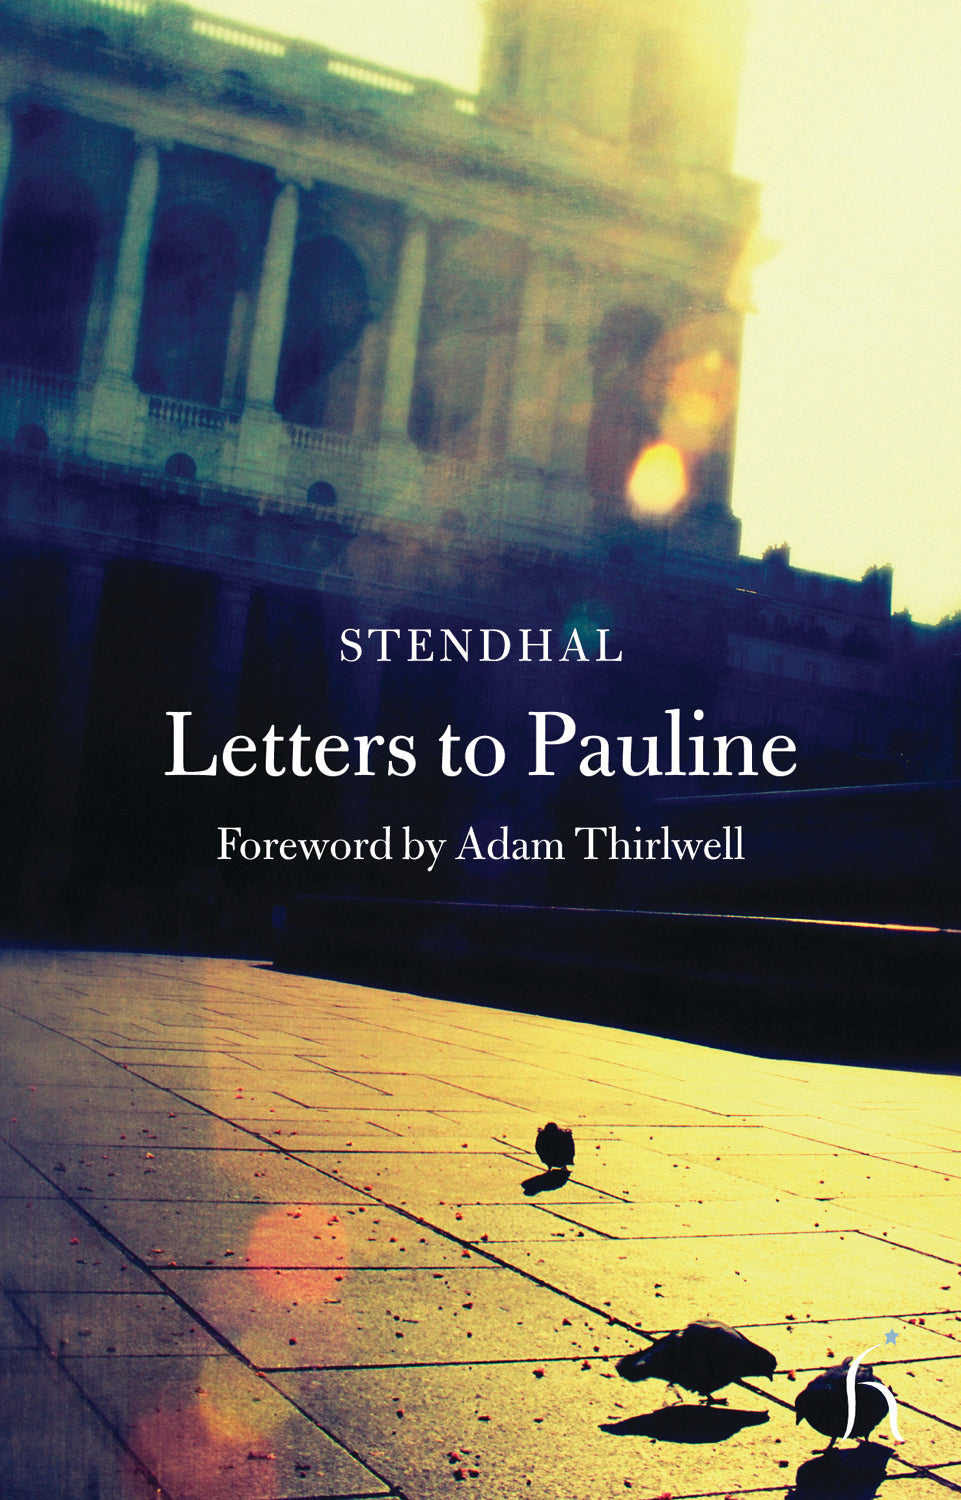 LETTERS TO PAULINE